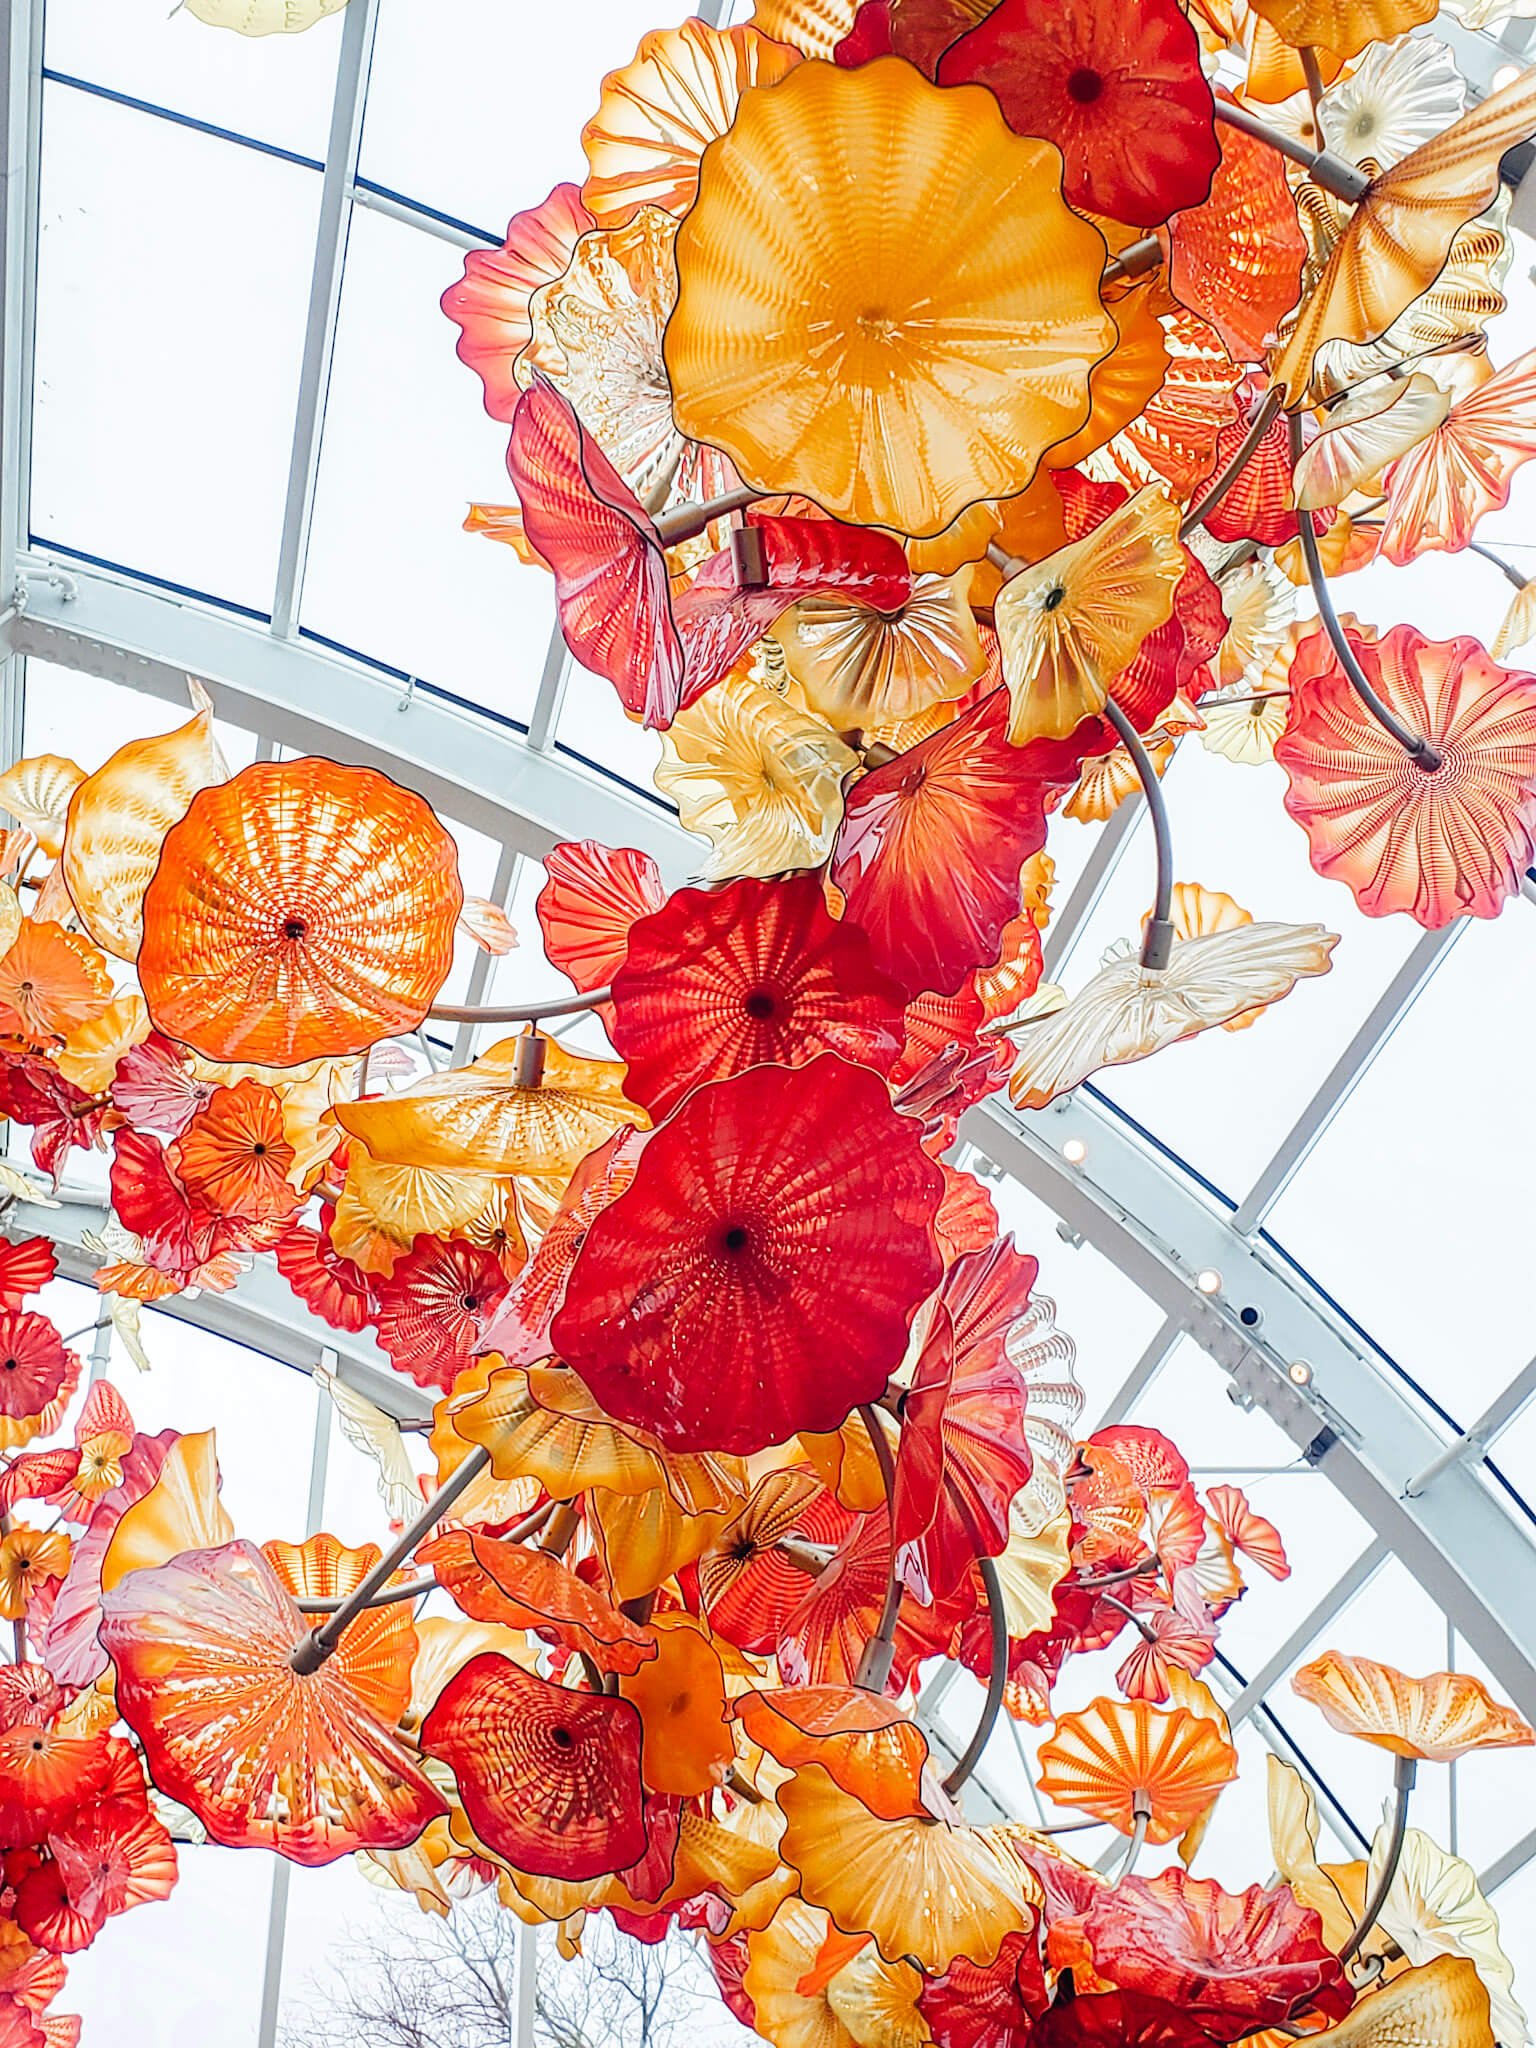 Chihuly Gardens and Glass sculpture